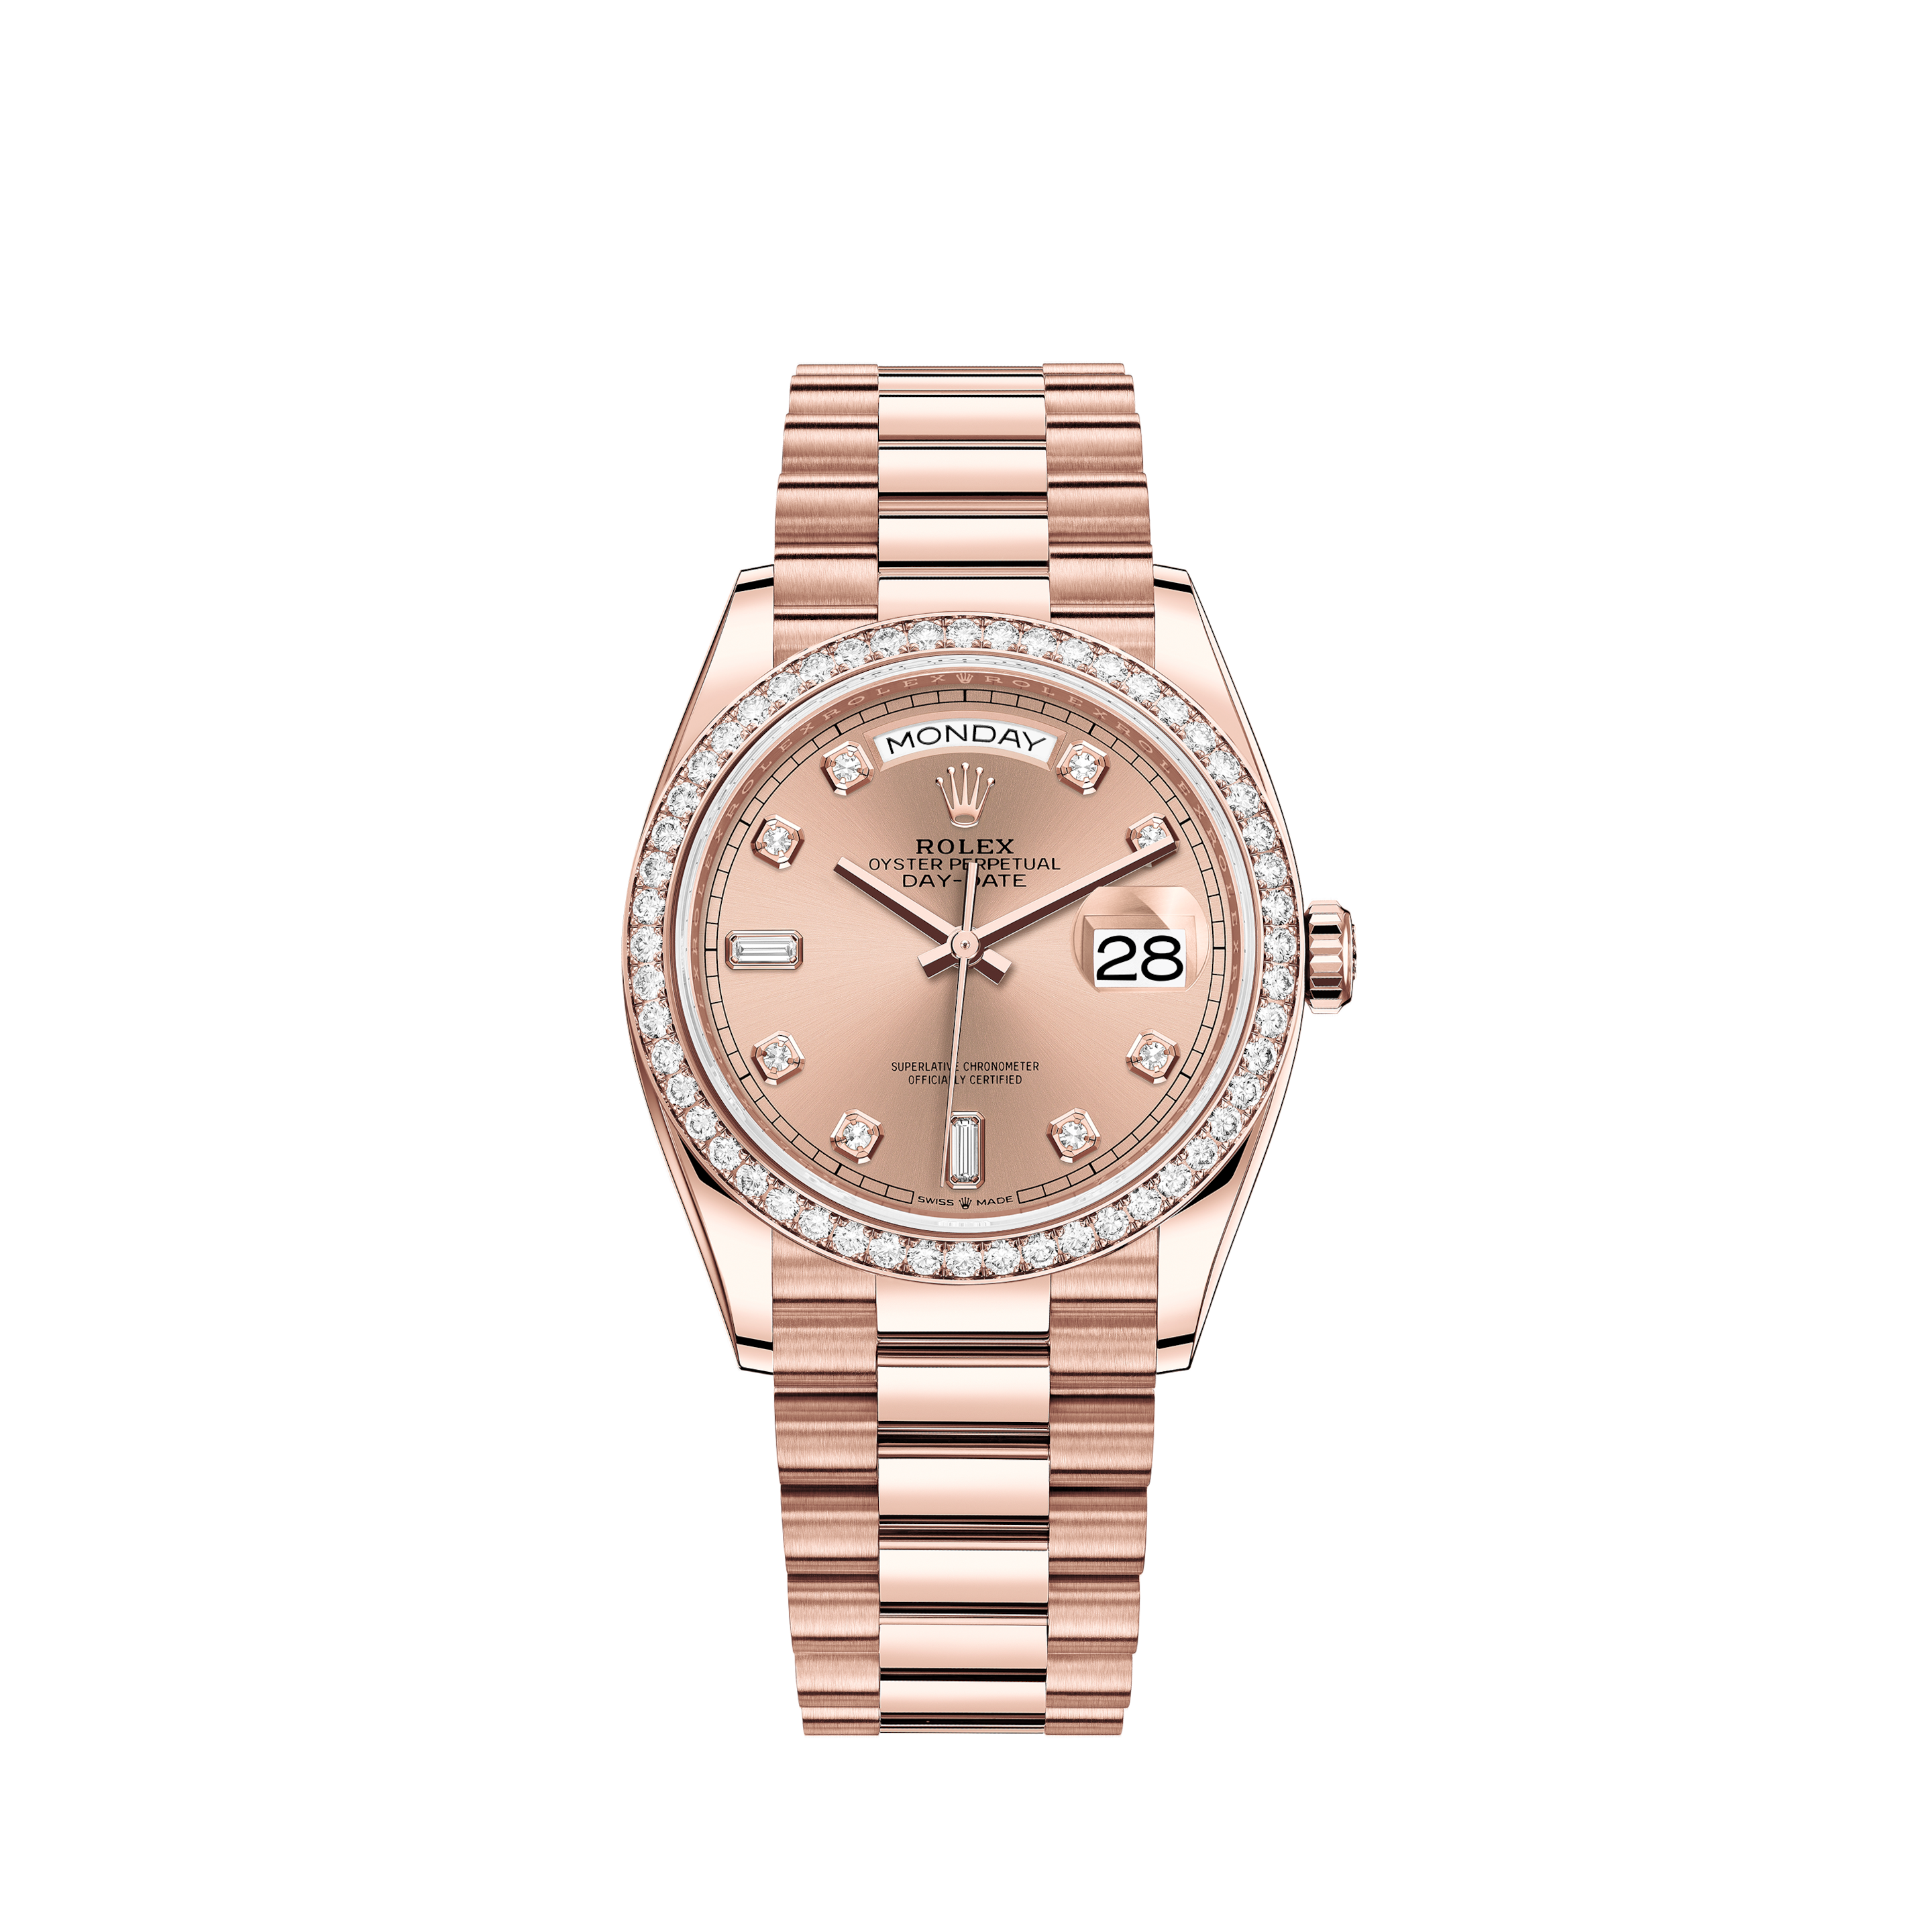 Rolex Datejust 31mm - Steel and Gold Pink Gold - Domed Bezel - Jubilee 178241 GRJRolex Datejust 31mm - Steel and Gold Pink Gold - Domed Bezel - Jubilee 178241 PCHFJ